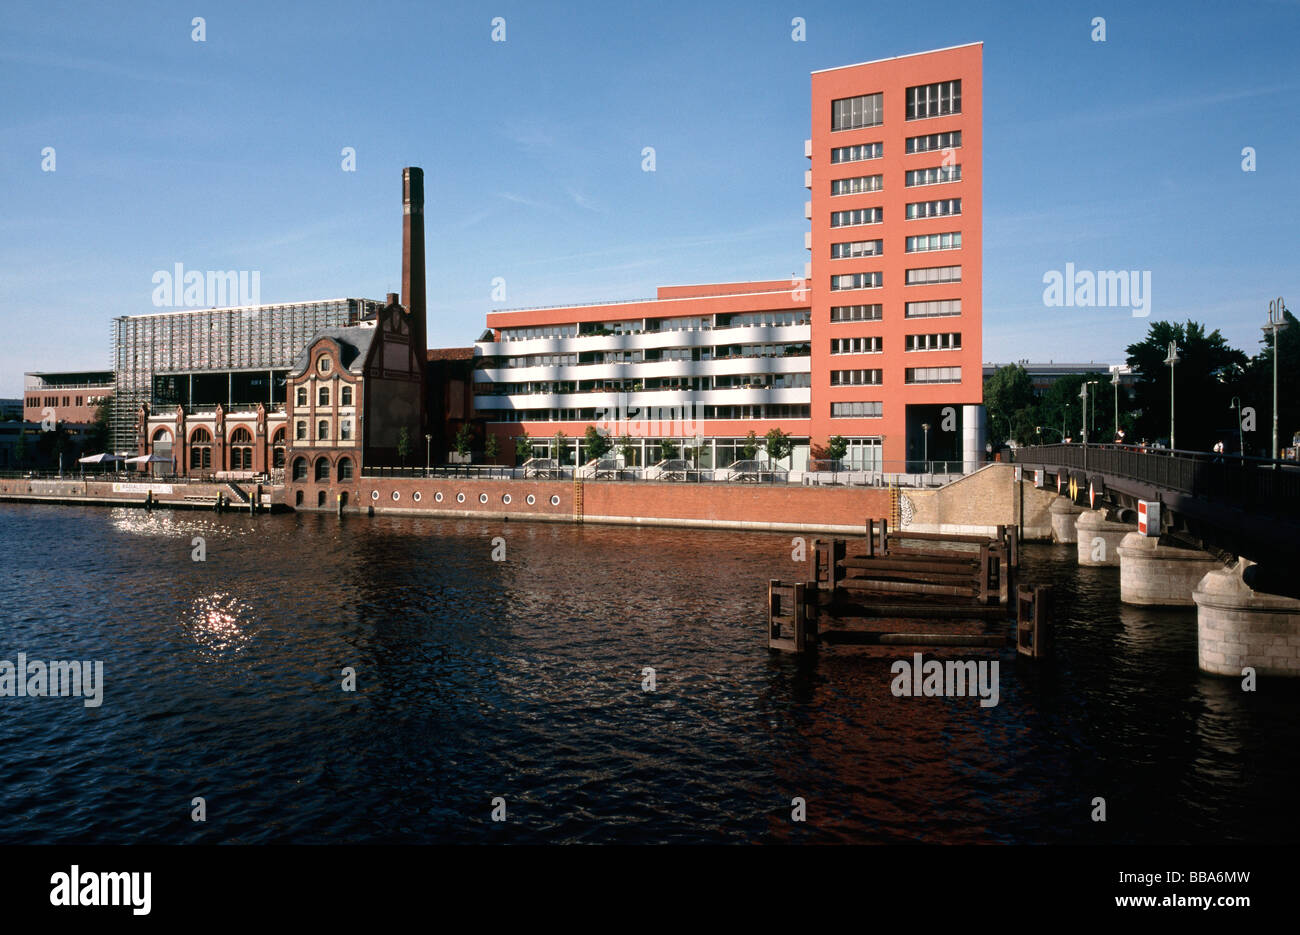 May 17, 2009 - Radialsystem V and Hotel Ibis (Accor) at Schillingbrücke in the German capital of Berlin. Stock Photo